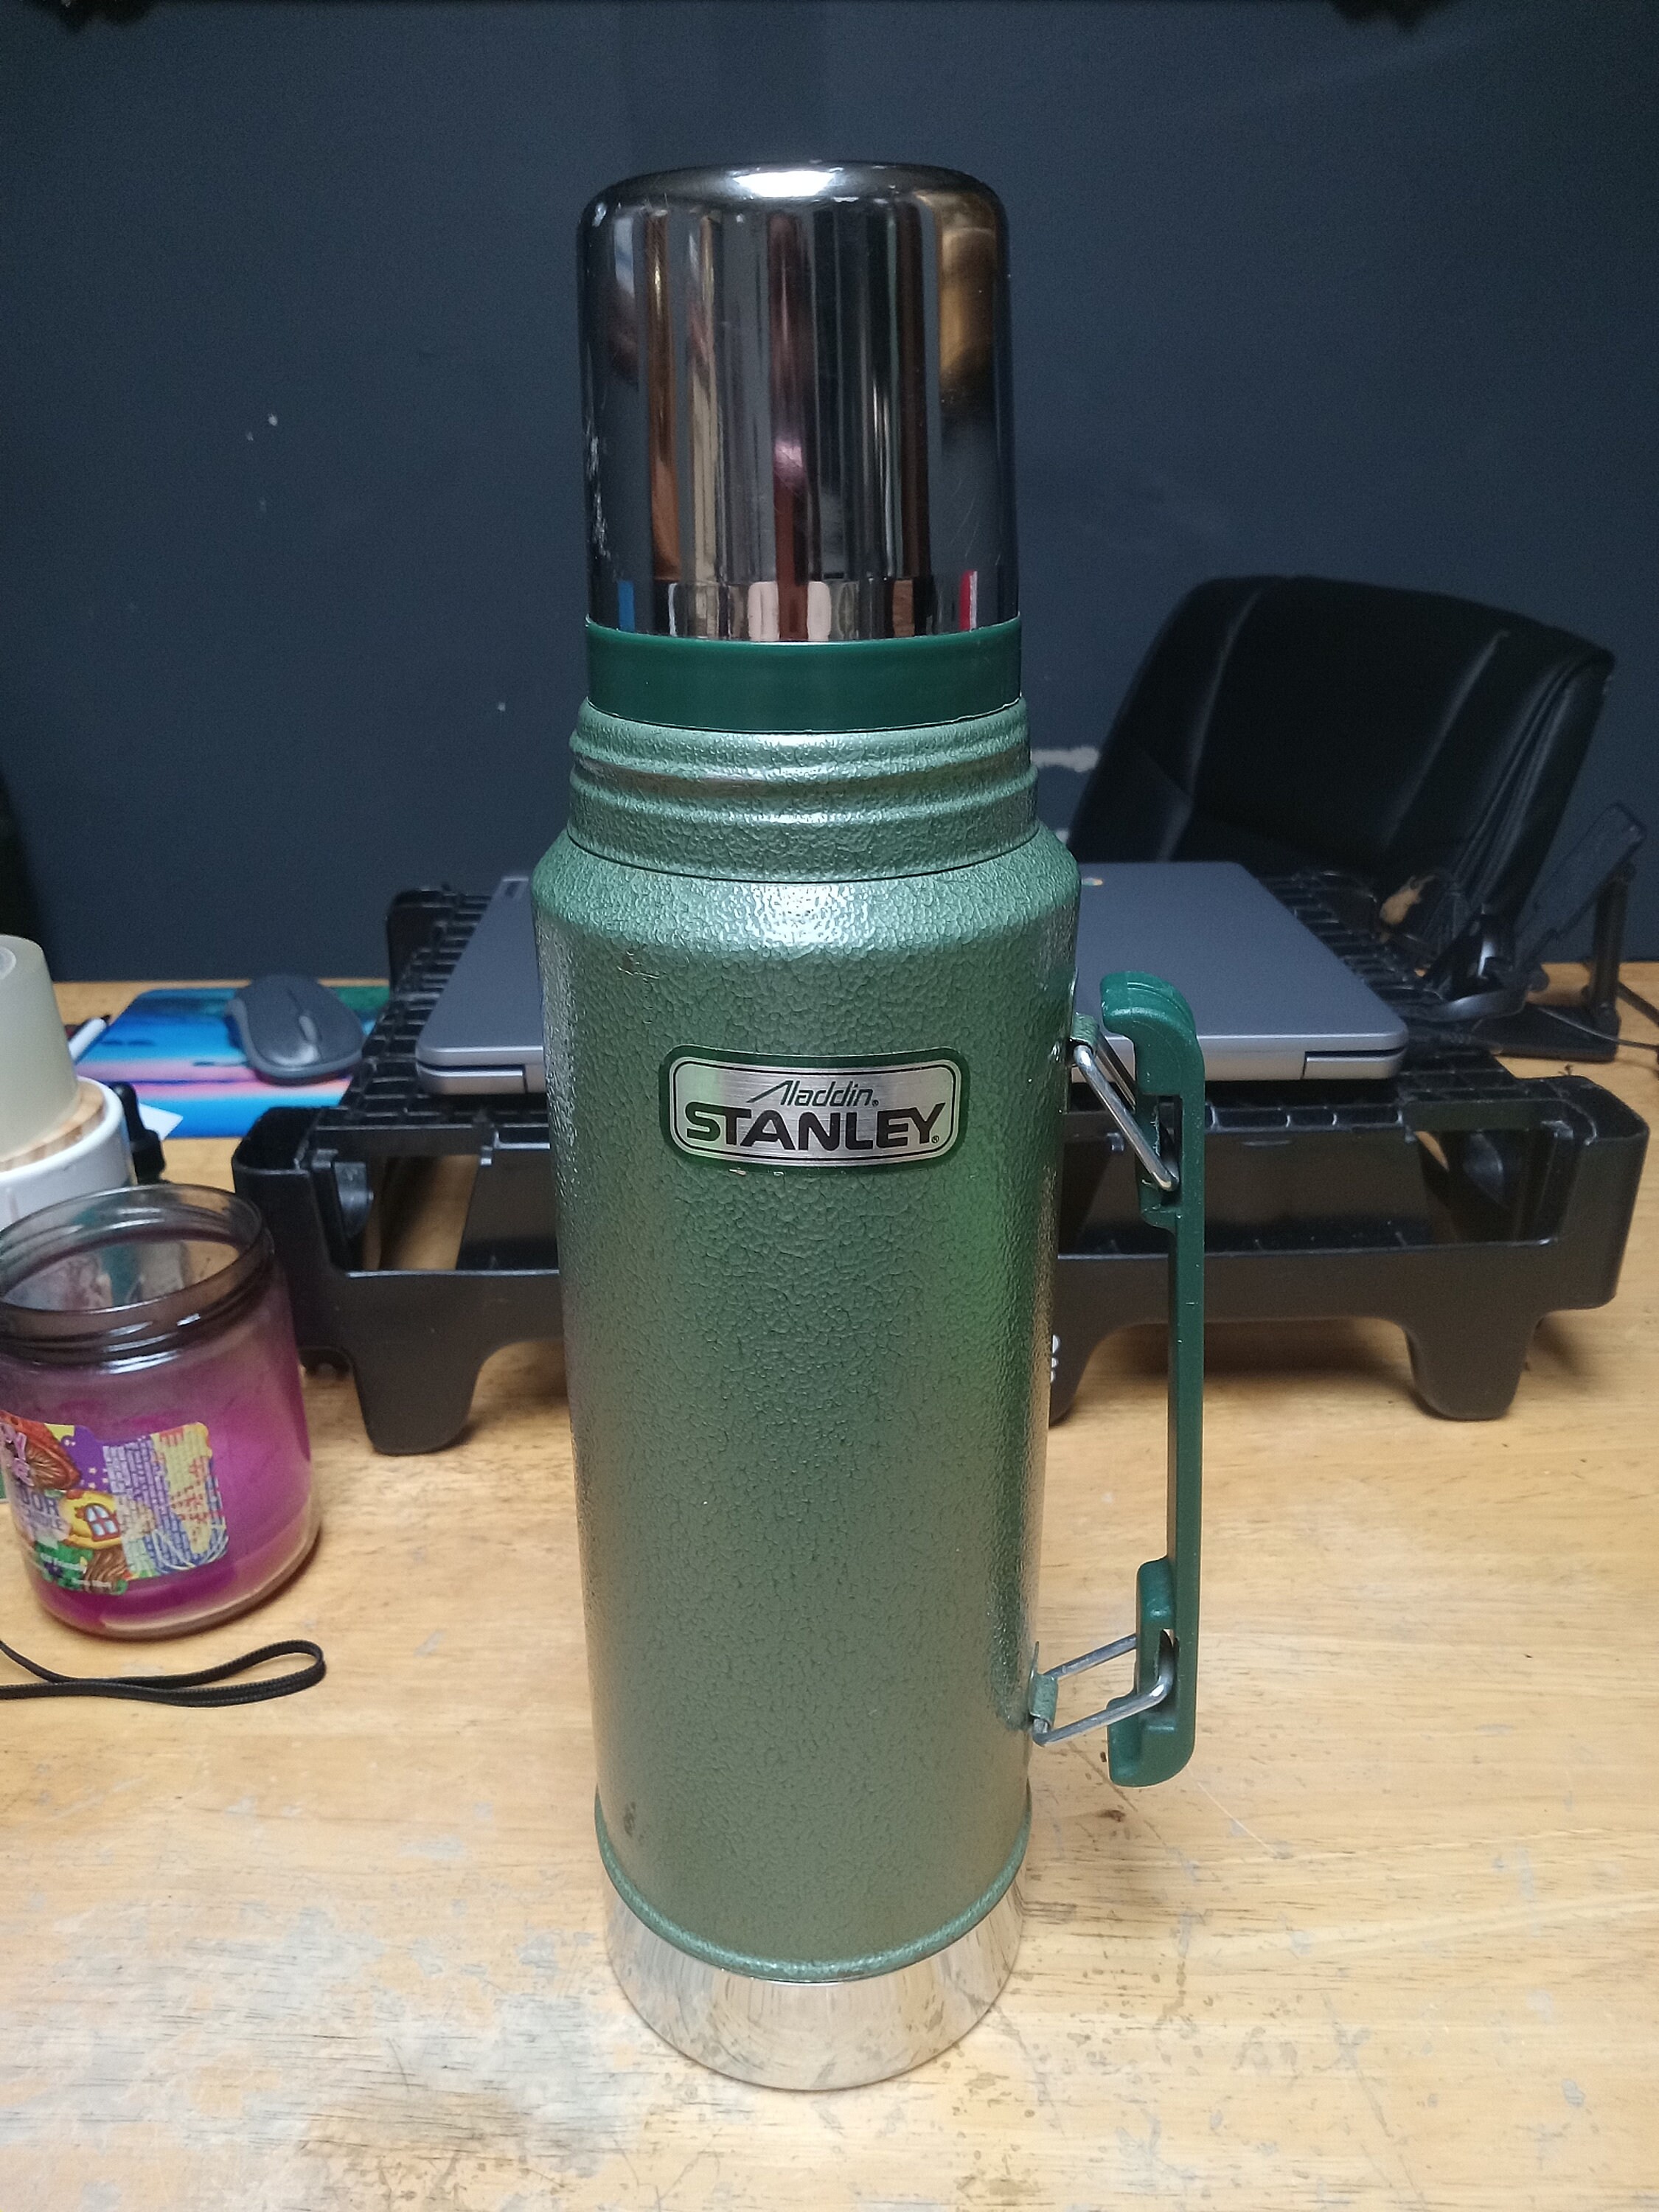 Buy Vintage Stanley Aladdin Thermos Green Insulated Vacuum Thermos